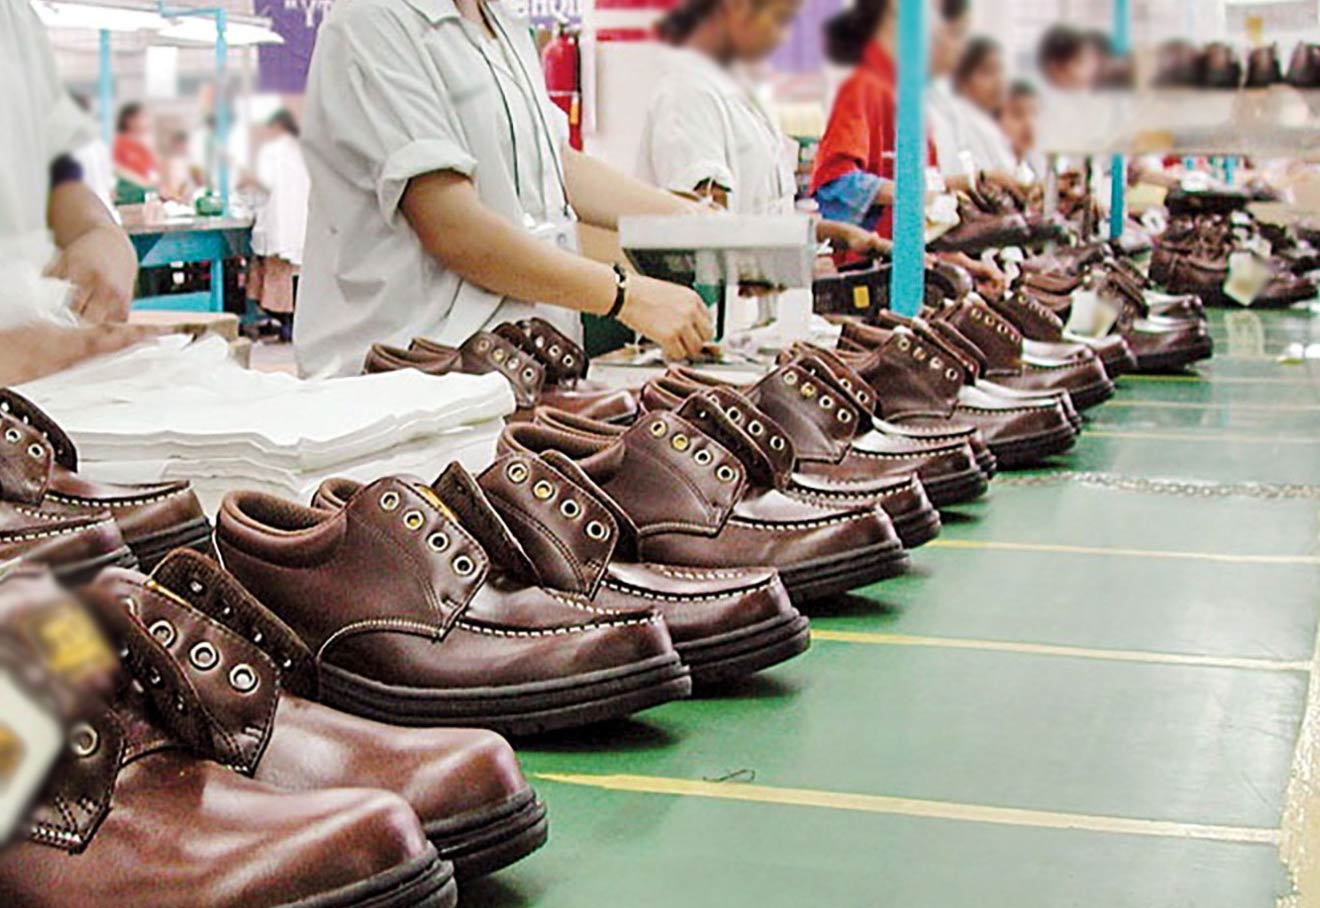 The women's footwear industry in India is set for a monumental